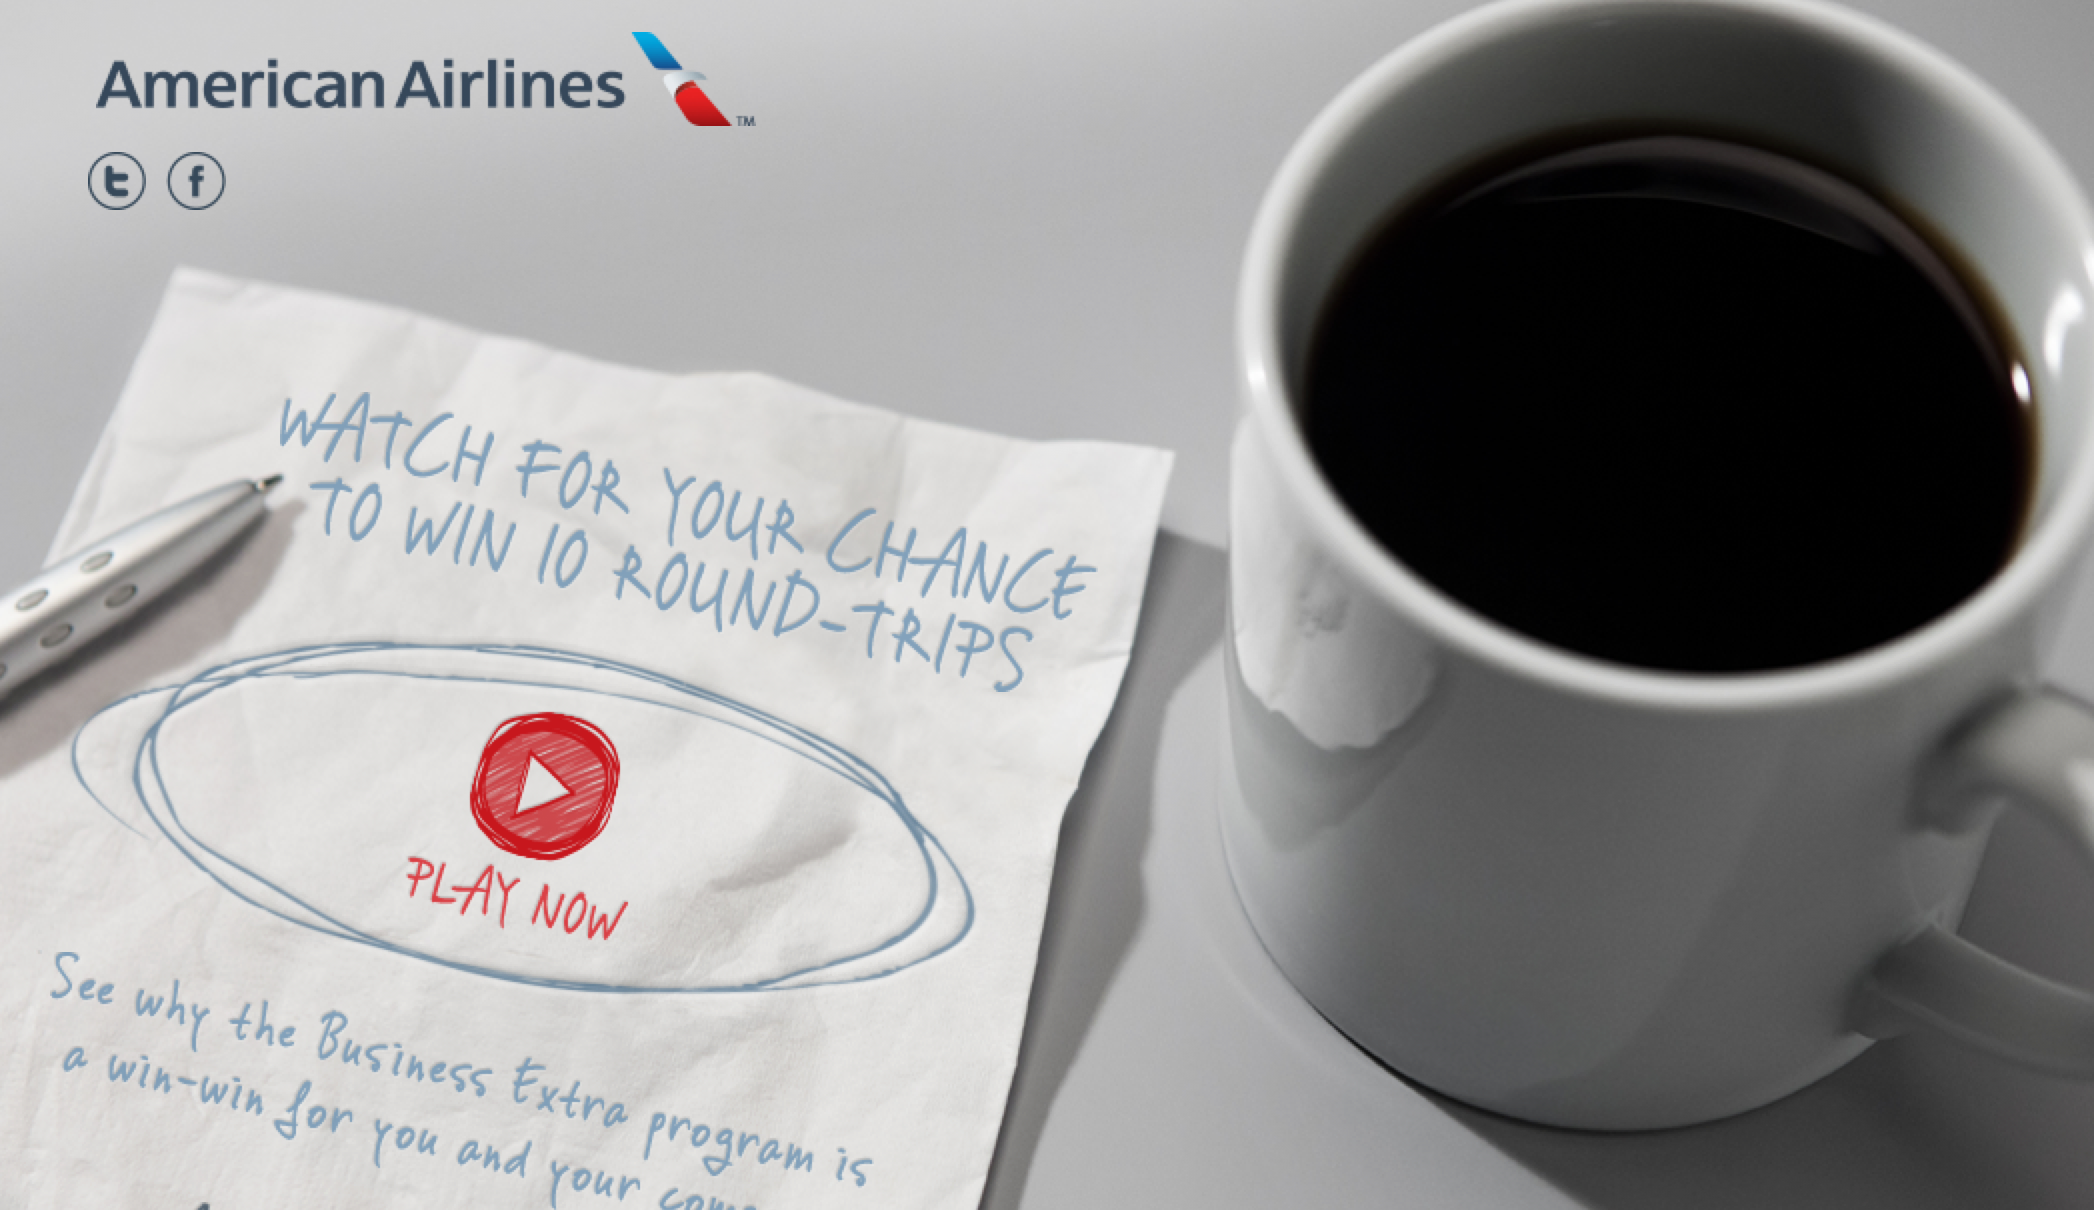 Win 10 round-trips from American’s Business Extra program